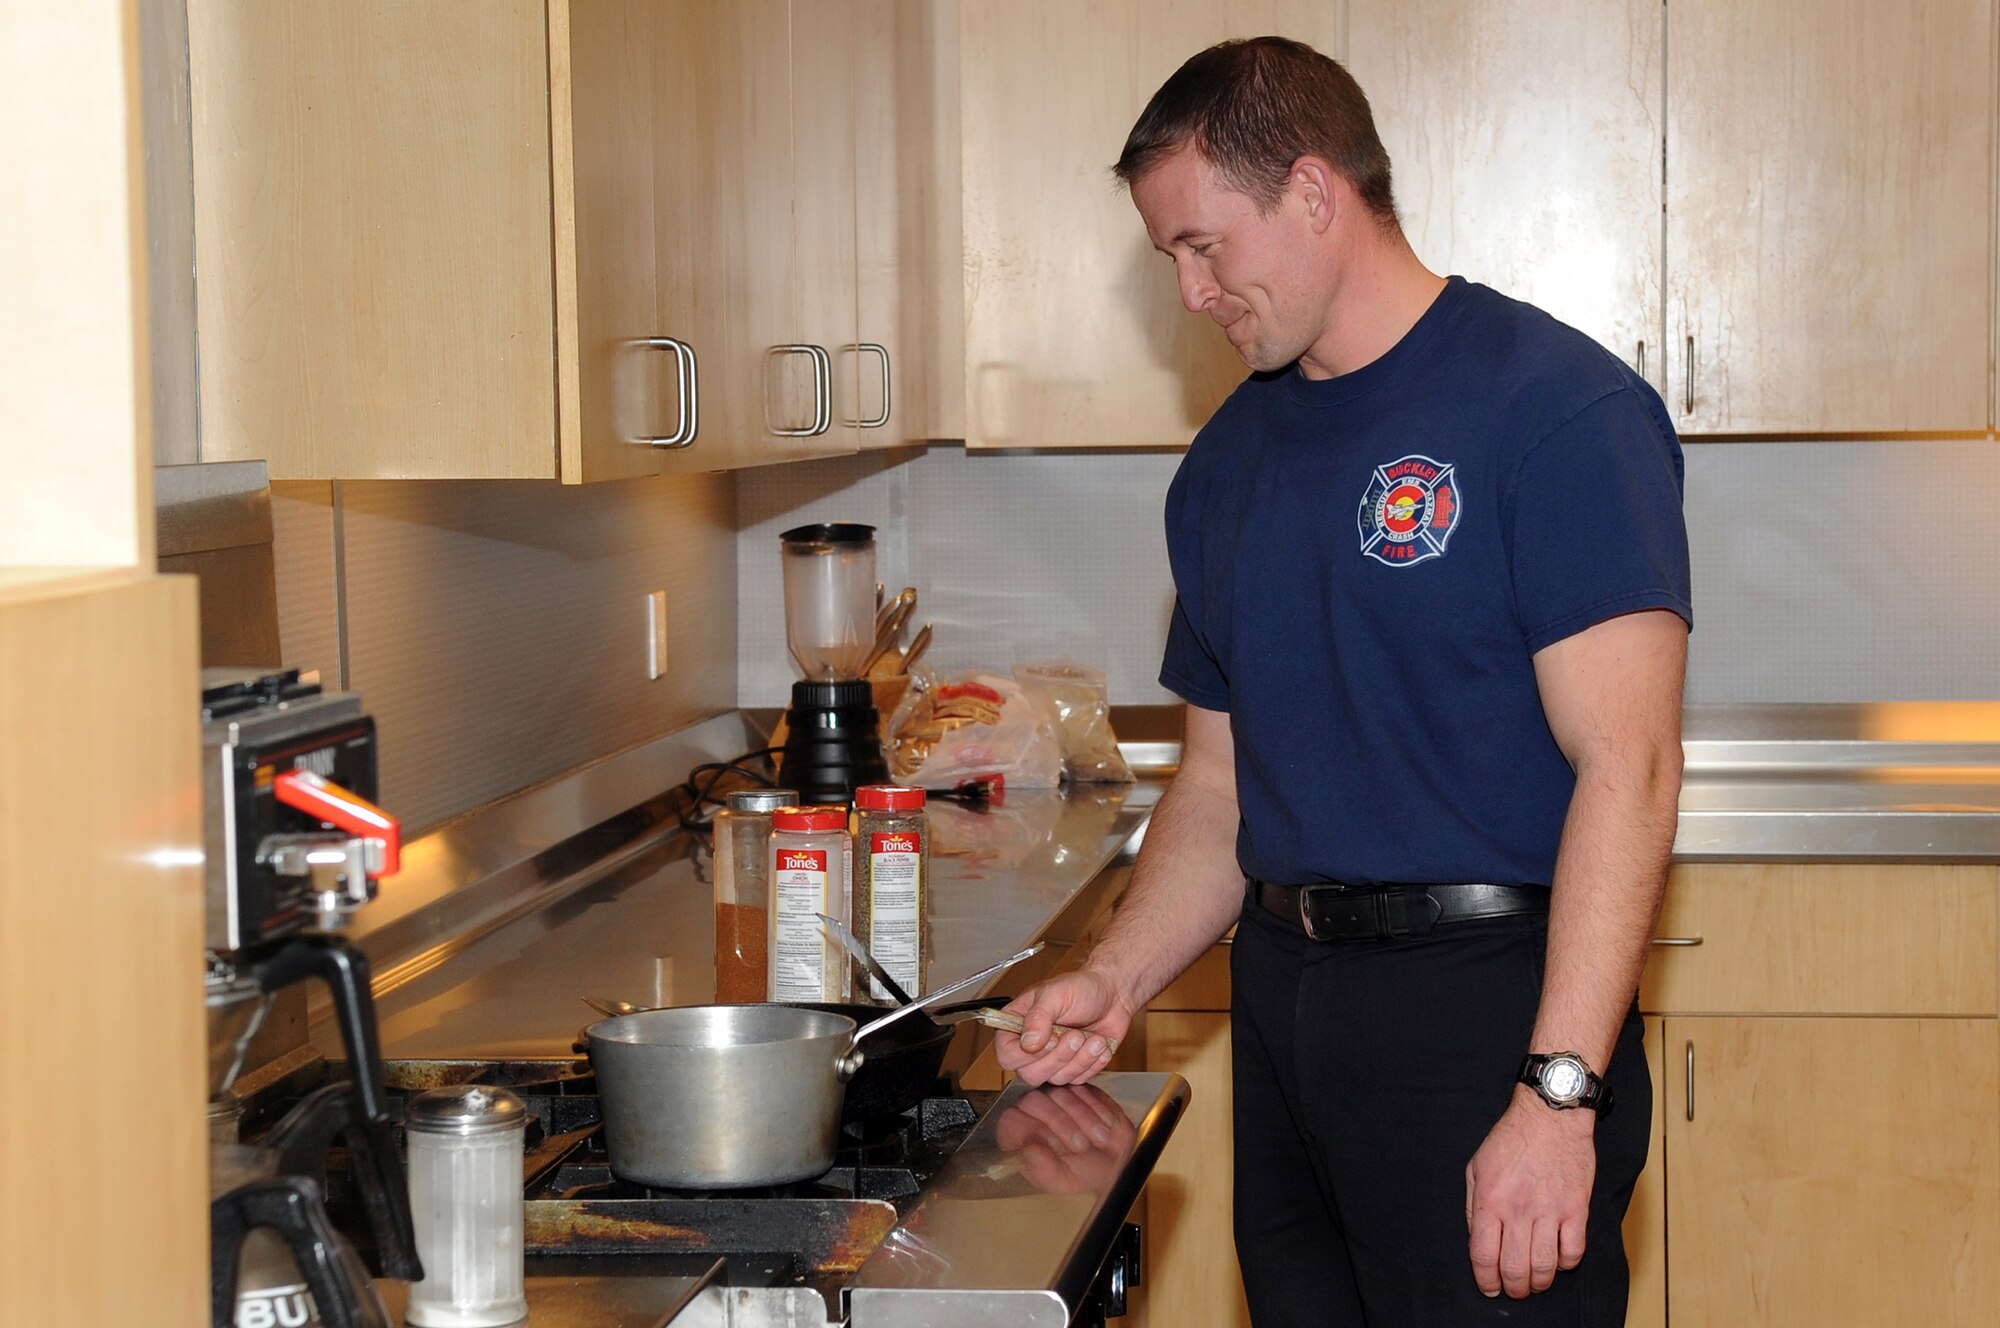 BUCKLEY AIR FORCE BASE, Colo.--Jason Debord, a fire fighter at Buckley Air Force Base cooks himself dinner, Jan. 4, 2011. Each fire fighter has to cook their own dinner and clean up after themselves, with the occasional fire station dinner where they all eat together. (U.S. Air Force photo by Airman Manisha Vasquez) 